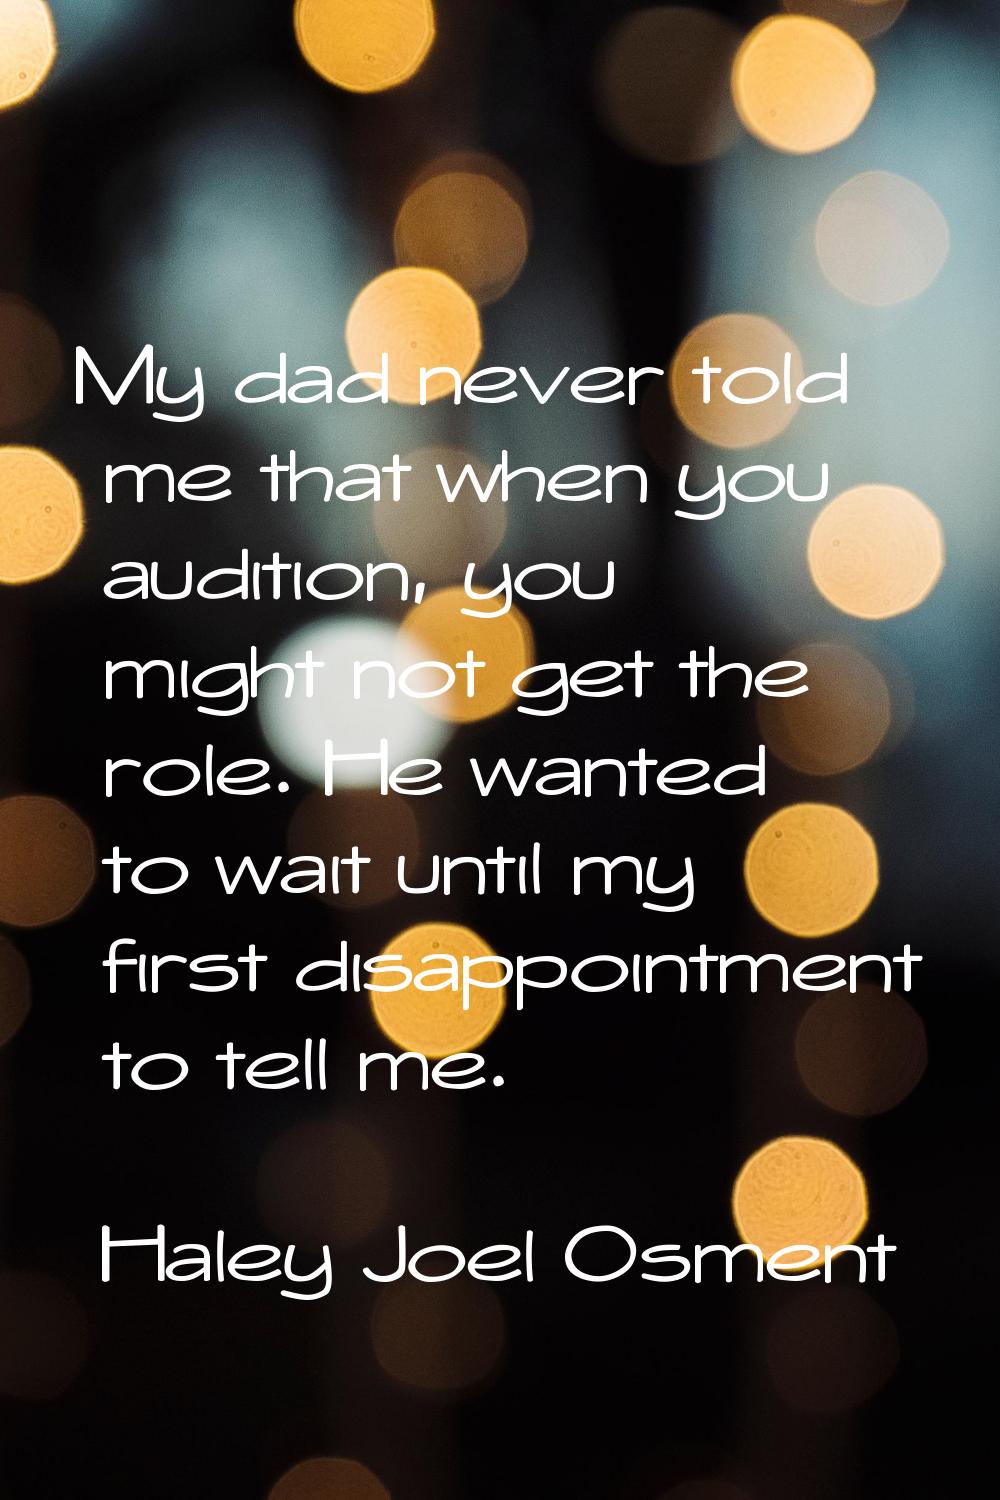 My dad never told me that when you audition, you might not get the role. He wanted to wait until my